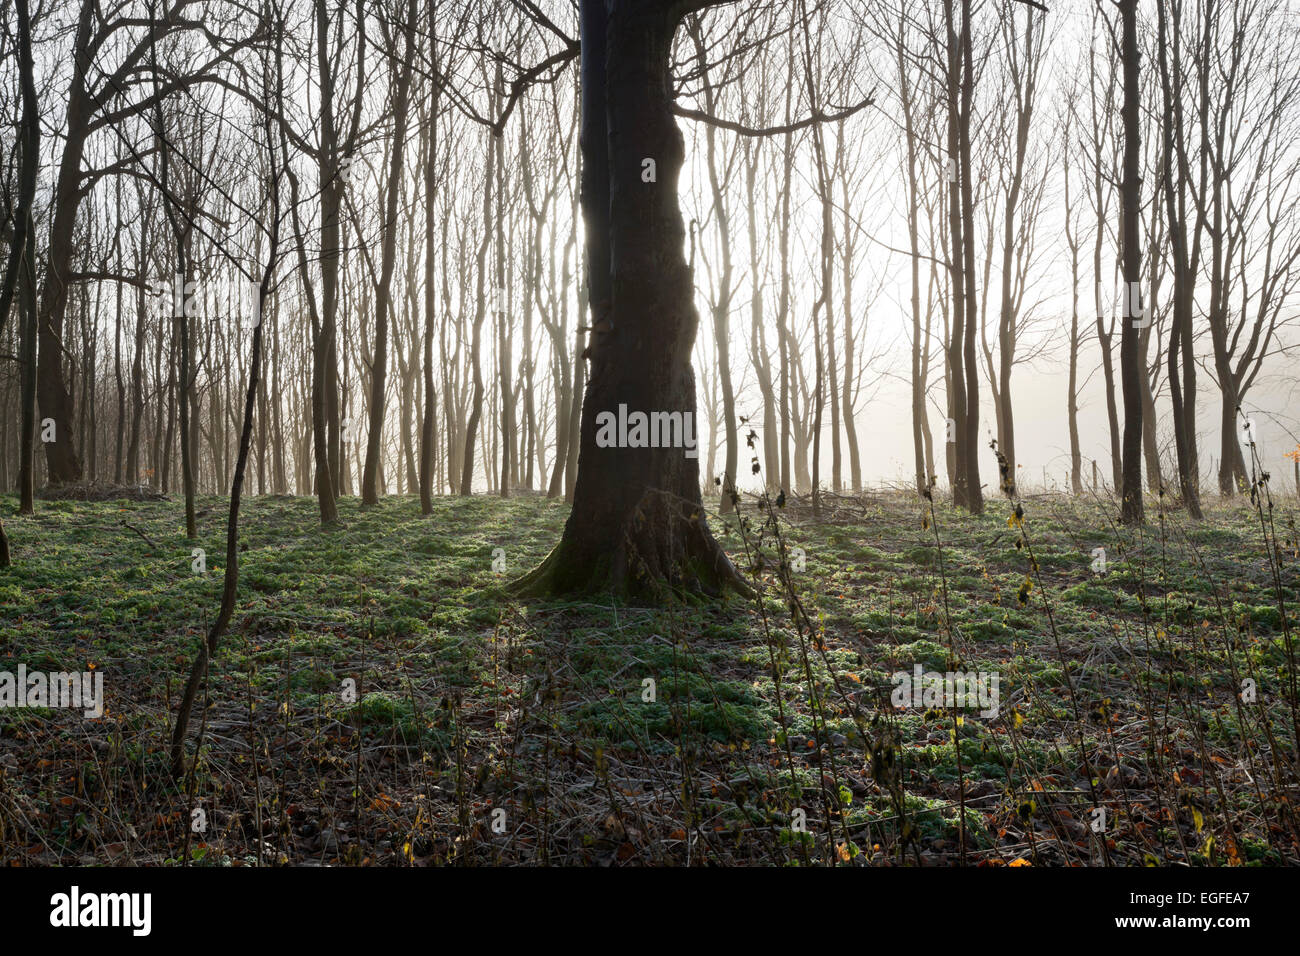 Misty wood in winter, Stow-on-the-Wold, Cotswolds, Gloucestershire, England, United Kingdom, Europe Stock Photo